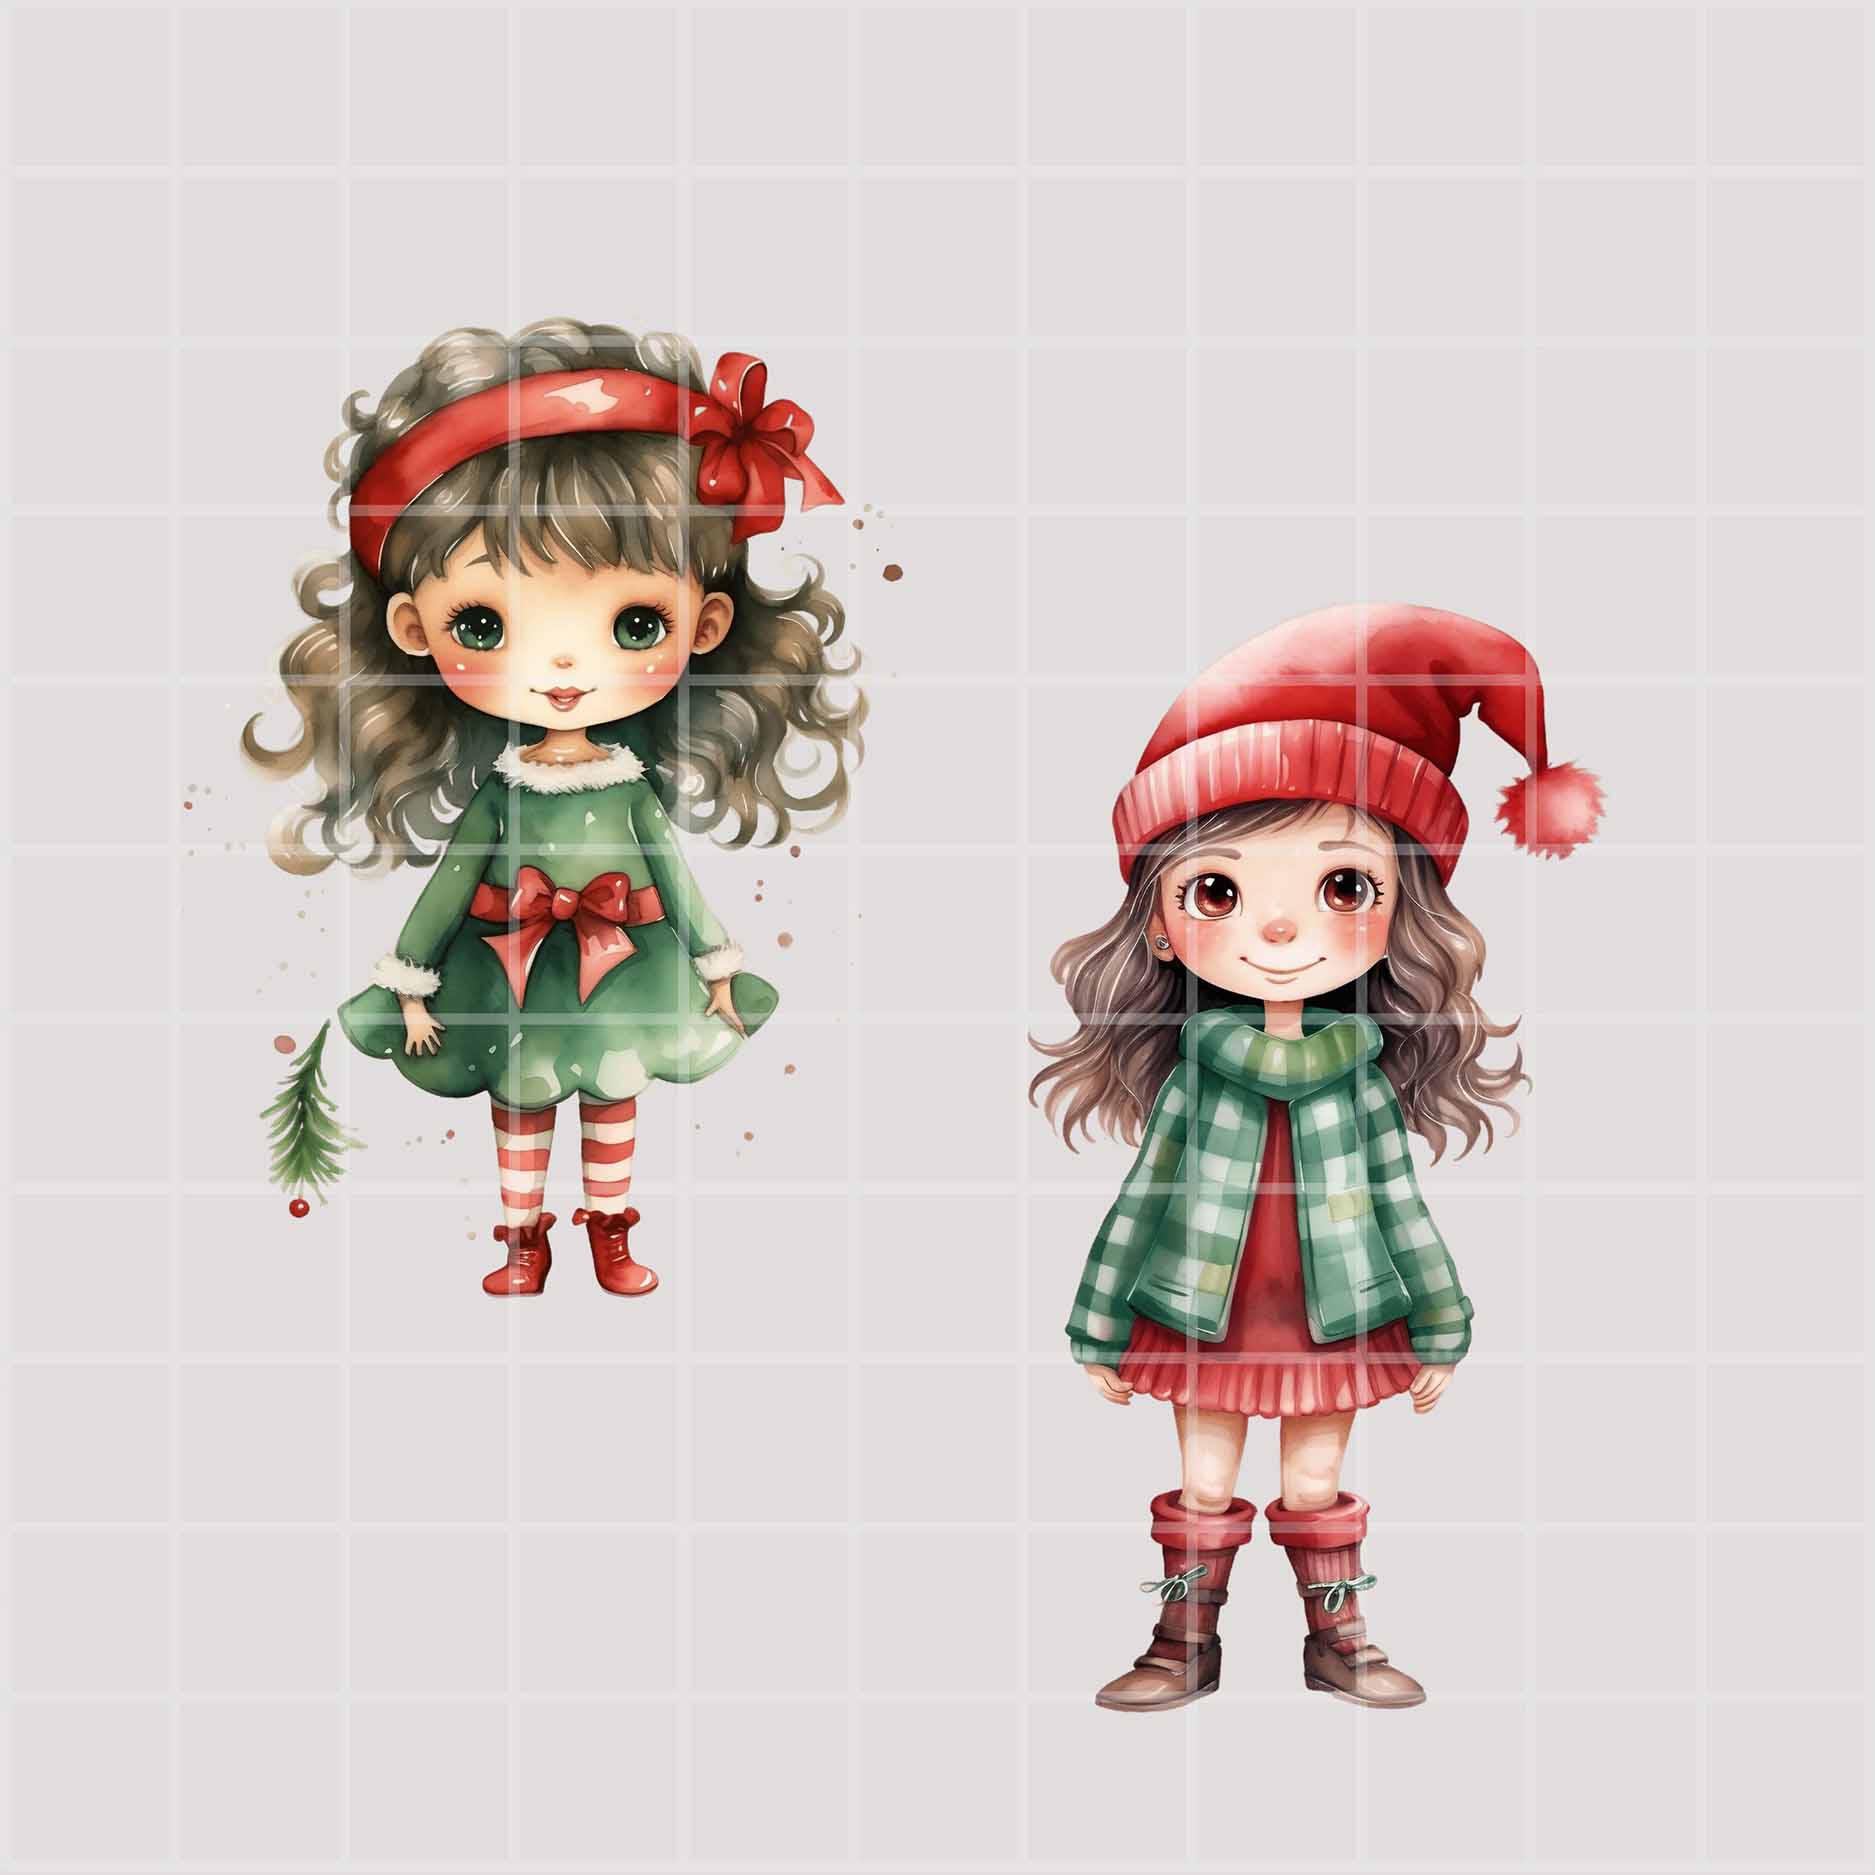 10 Watercolor Holly Jolly cute girl clipart, Christmas Decor Clipart in PNG, Paper craft, print preview image.